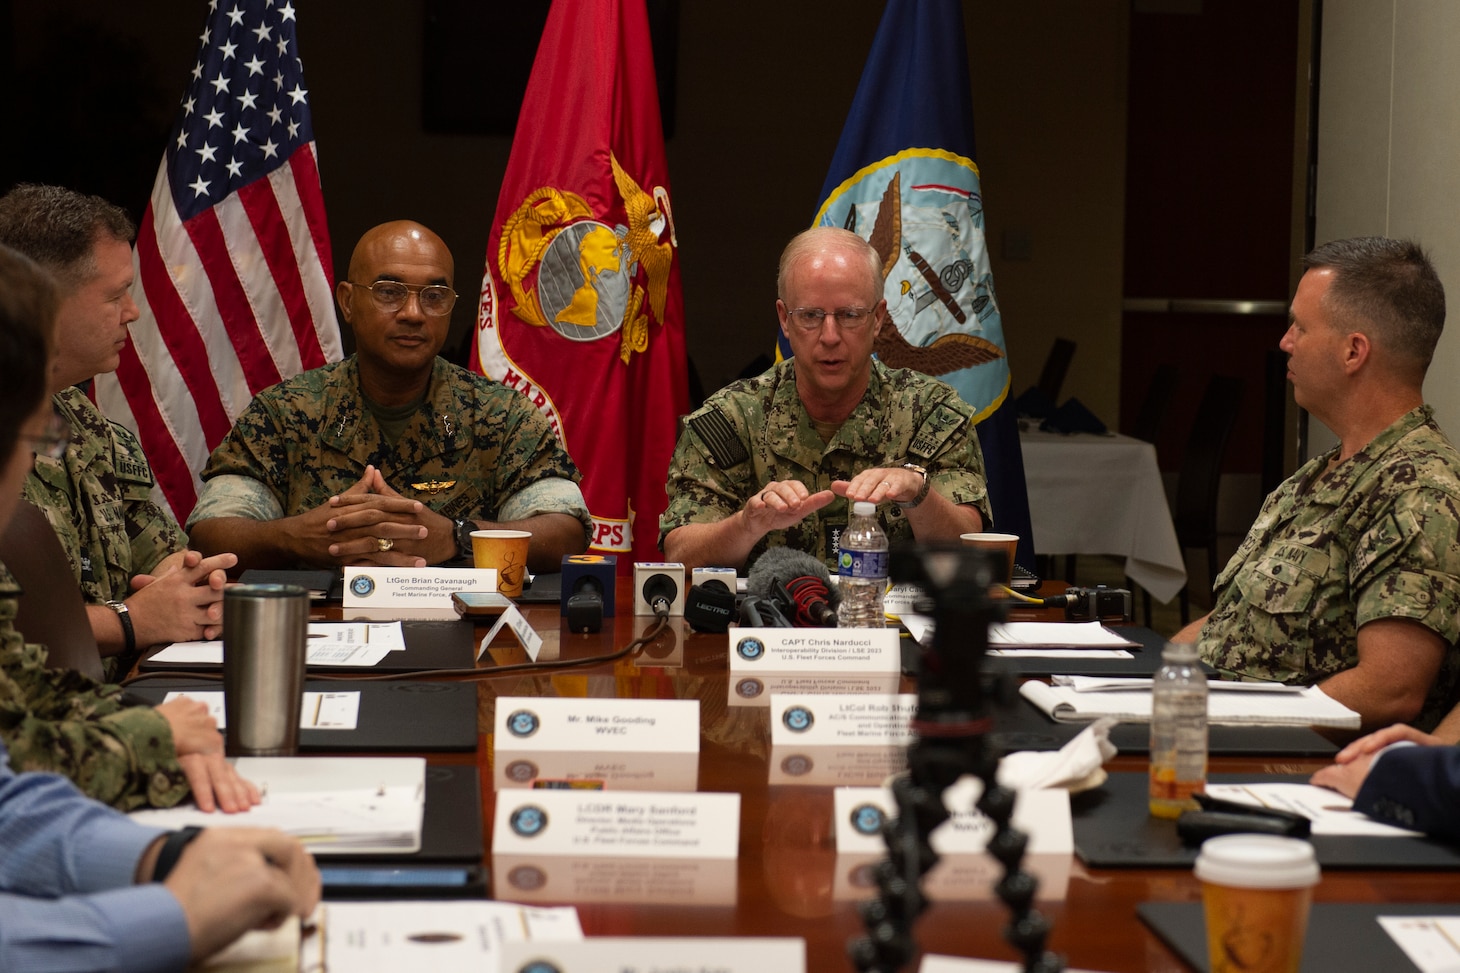 NORFOLK, Va. -- Adm. Daryl Caudle, commander, U.S. Fleet Forces Command, and Lt. Gen. Brian Cavanaugh, commander, Marine Forces Command announce the upcoming Large Scale Exercise (LSE) 2023 during a media event held at U.S. Fleet Forces Command, July 24. Scheduled to run from Aug. 9-18, LSE 2023 is a live, virtual, and constructive, globally-integrated exercise designed to refine the synchronization of maritime operations across six maritime component commands, seven numbered fleets, and 22 time zones. (U.S. Navy photo by Chief Mass Communication Specialist Lauren Howes)